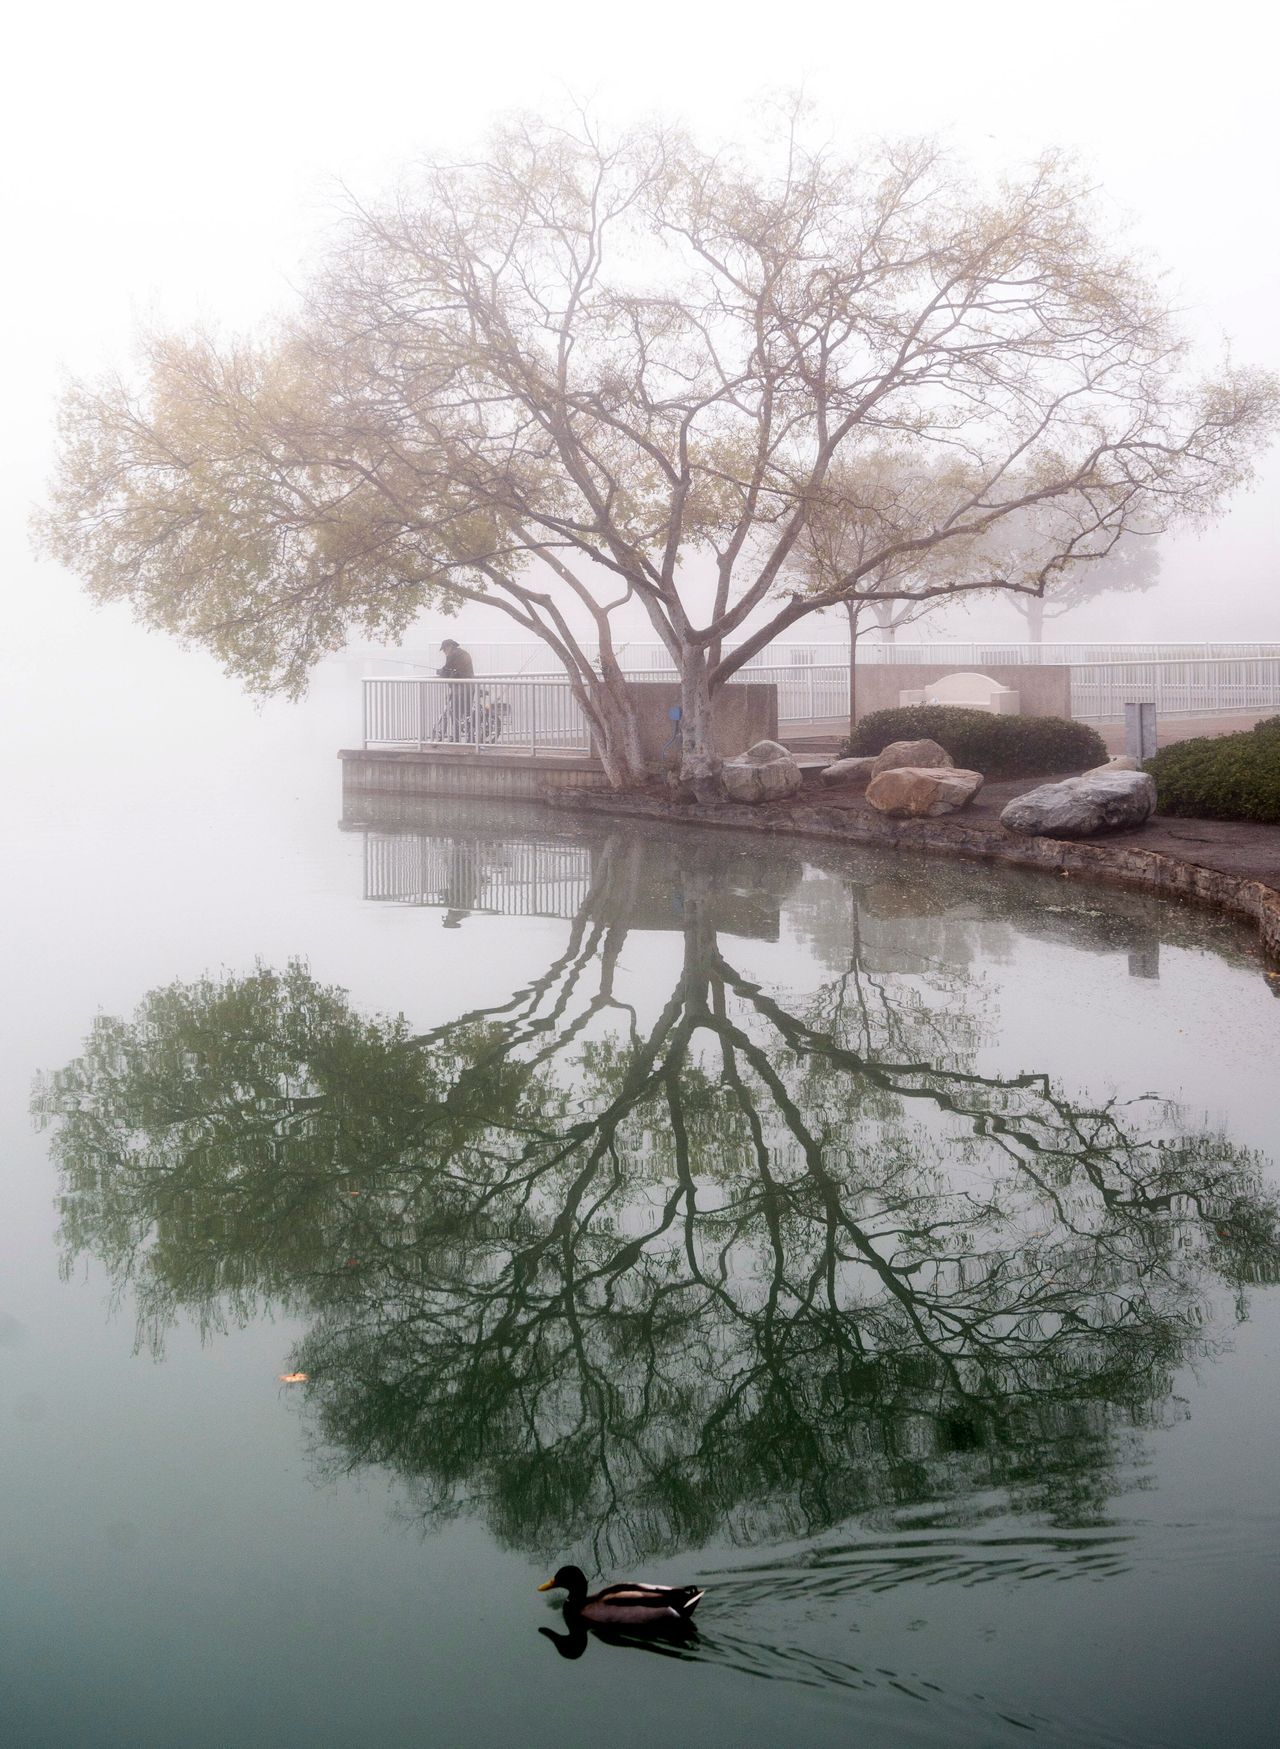 A man fishes during a foggy morning at North Lake in Irvine, California, on Tuesday.